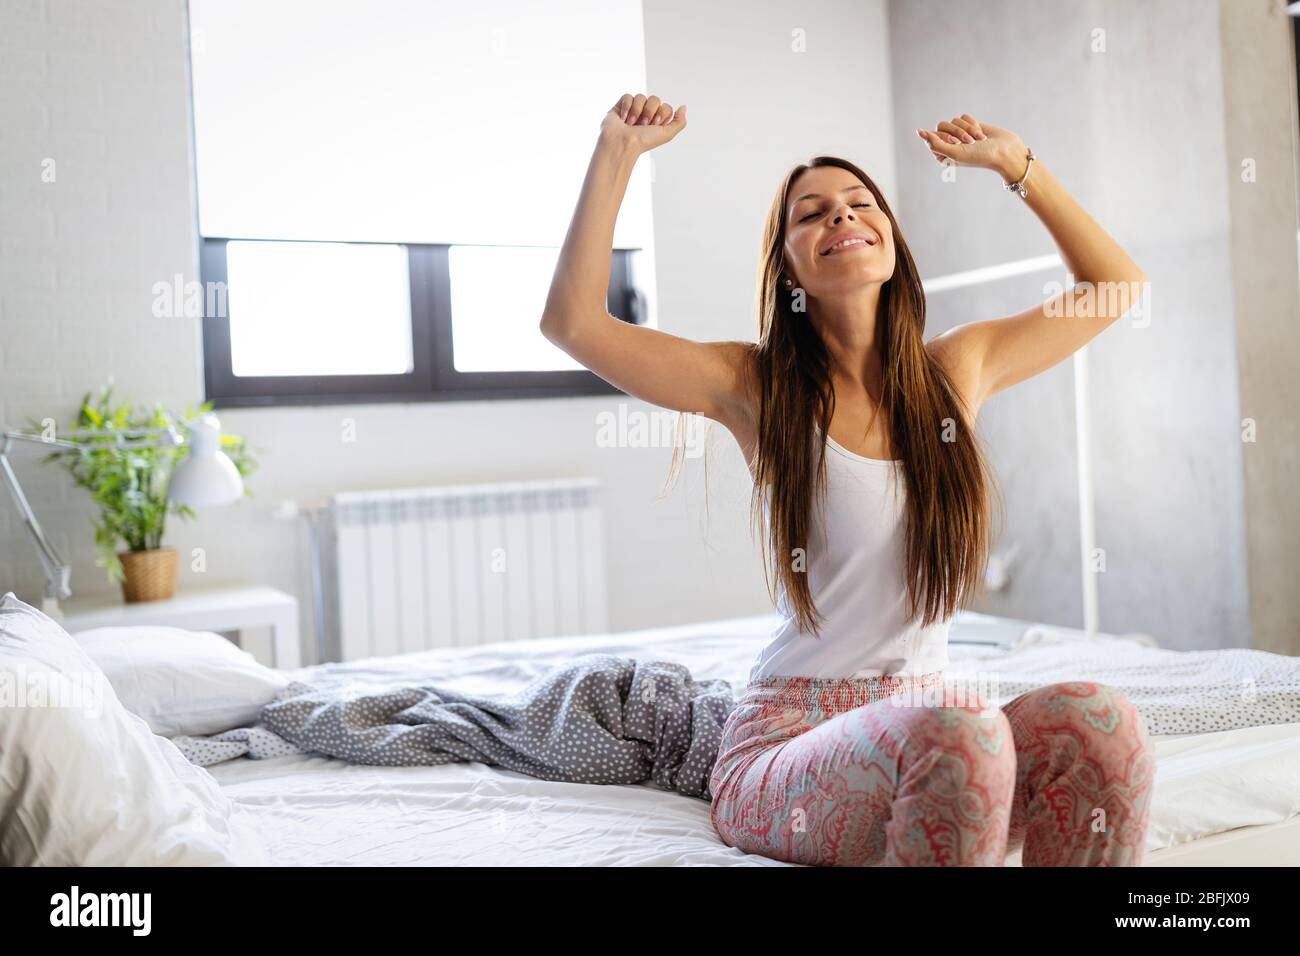 Woman Stretching In Bed After Wake Up Entering A Day Happy And Relaxed